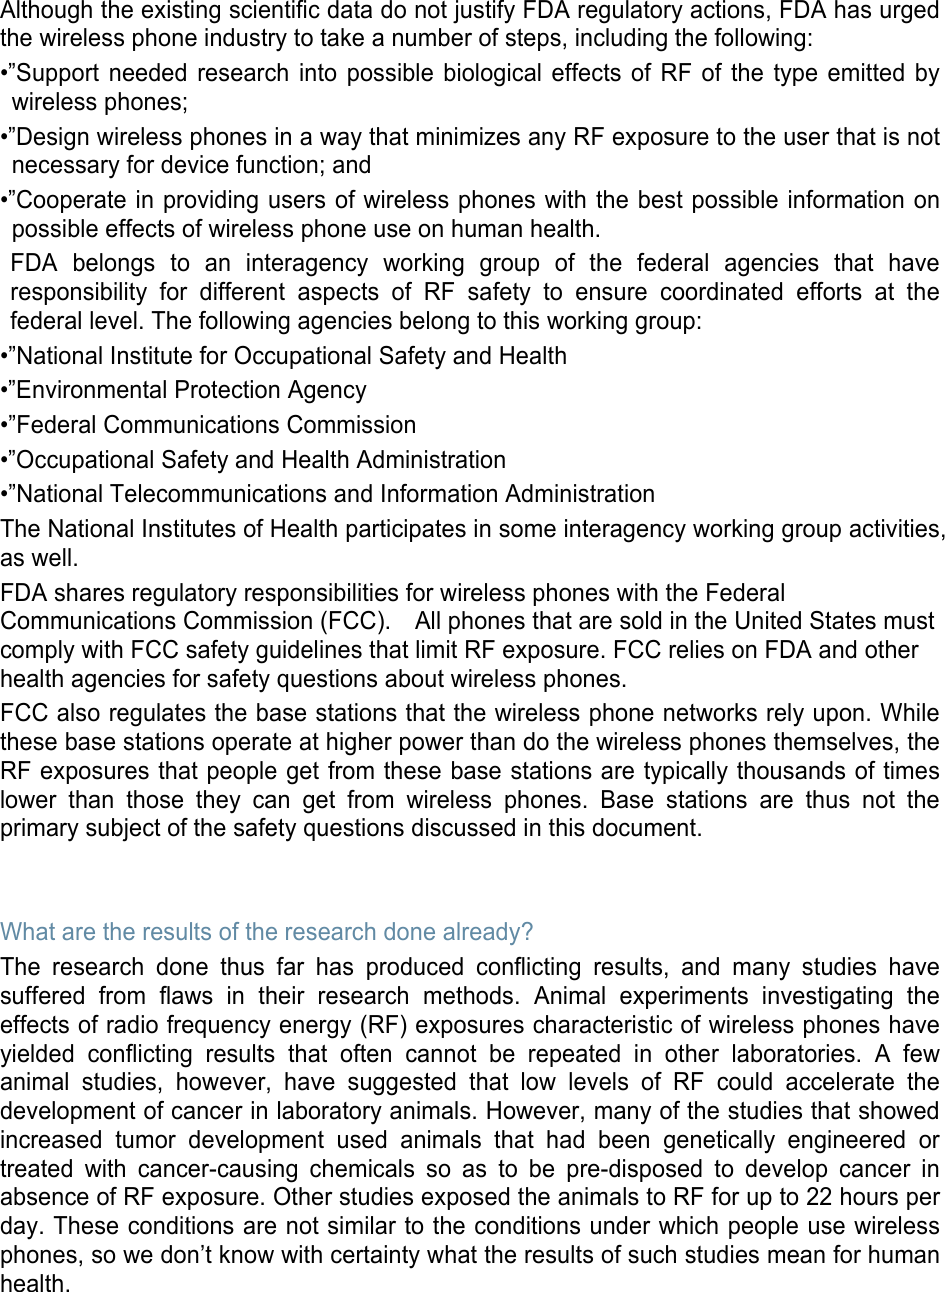 Although the existing scientific data do not justify FDA regulatory actions, FDA has urged the wireless phone industry to take a number of steps, including the following: •”Support needed research into possible biological effects of RF of the type emitted by wireless phones; •”Design wireless phones in a way that minimizes any RF exposure to the user that is not necessary for device function; and •”Cooperate in providing users of wireless phones with the best possible information on possible effects of wireless phone use on human health. FDA belongs to an interagency working group of the federal agencies that have responsibility for different aspects of RF safety to ensure coordinated efforts at the federal level. The following agencies belong to this working group: •”National Institute for Occupational Safety and Health •”Environmental Protection Agency •”Federal Communications Commission •”Occupational Safety and Health Administration •”National Telecommunications and Information Administration The National Institutes of Health participates in some interagency working group activities, as well. FDA shares regulatory responsibilities for wireless phones with the Federal Communications Commission (FCC).    All phones that are sold in the United States must comply with FCC safety guidelines that limit RF exposure. FCC relies on FDA and other health agencies for safety questions about wireless phones. FCC also regulates the base stations that the wireless phone networks rely upon. While these base stations operate at higher power than do the wireless phones themselves, the RF exposures that people get from these base stations are typically thousands of times lower than those they can get from wireless phones. Base stations are thus not the primary subject of the safety questions discussed in this document.   What are the results of the research done already? The research done thus far has produced conflicting results, and many studies have suffered from flaws in their research methods. Animal experiments investigating the effects of radio frequency energy (RF) exposures characteristic of wireless phones have yielded conflicting results that often cannot be repeated in other laboratories. A few animal studies, however, have suggested that low levels of RF could accelerate the development of cancer in laboratory animals. However, many of the studies that showed increased tumor development used animals that had been genetically engineered or treated with cancer-causing chemicals so as to be pre-disposed to develop cancer in absence of RF exposure. Other studies exposed the animals to RF for up to 22 hours per day. These conditions are not similar to the conditions under which people use wireless phones, so we don’t know with certainty what the results of such studies mean for human health.    